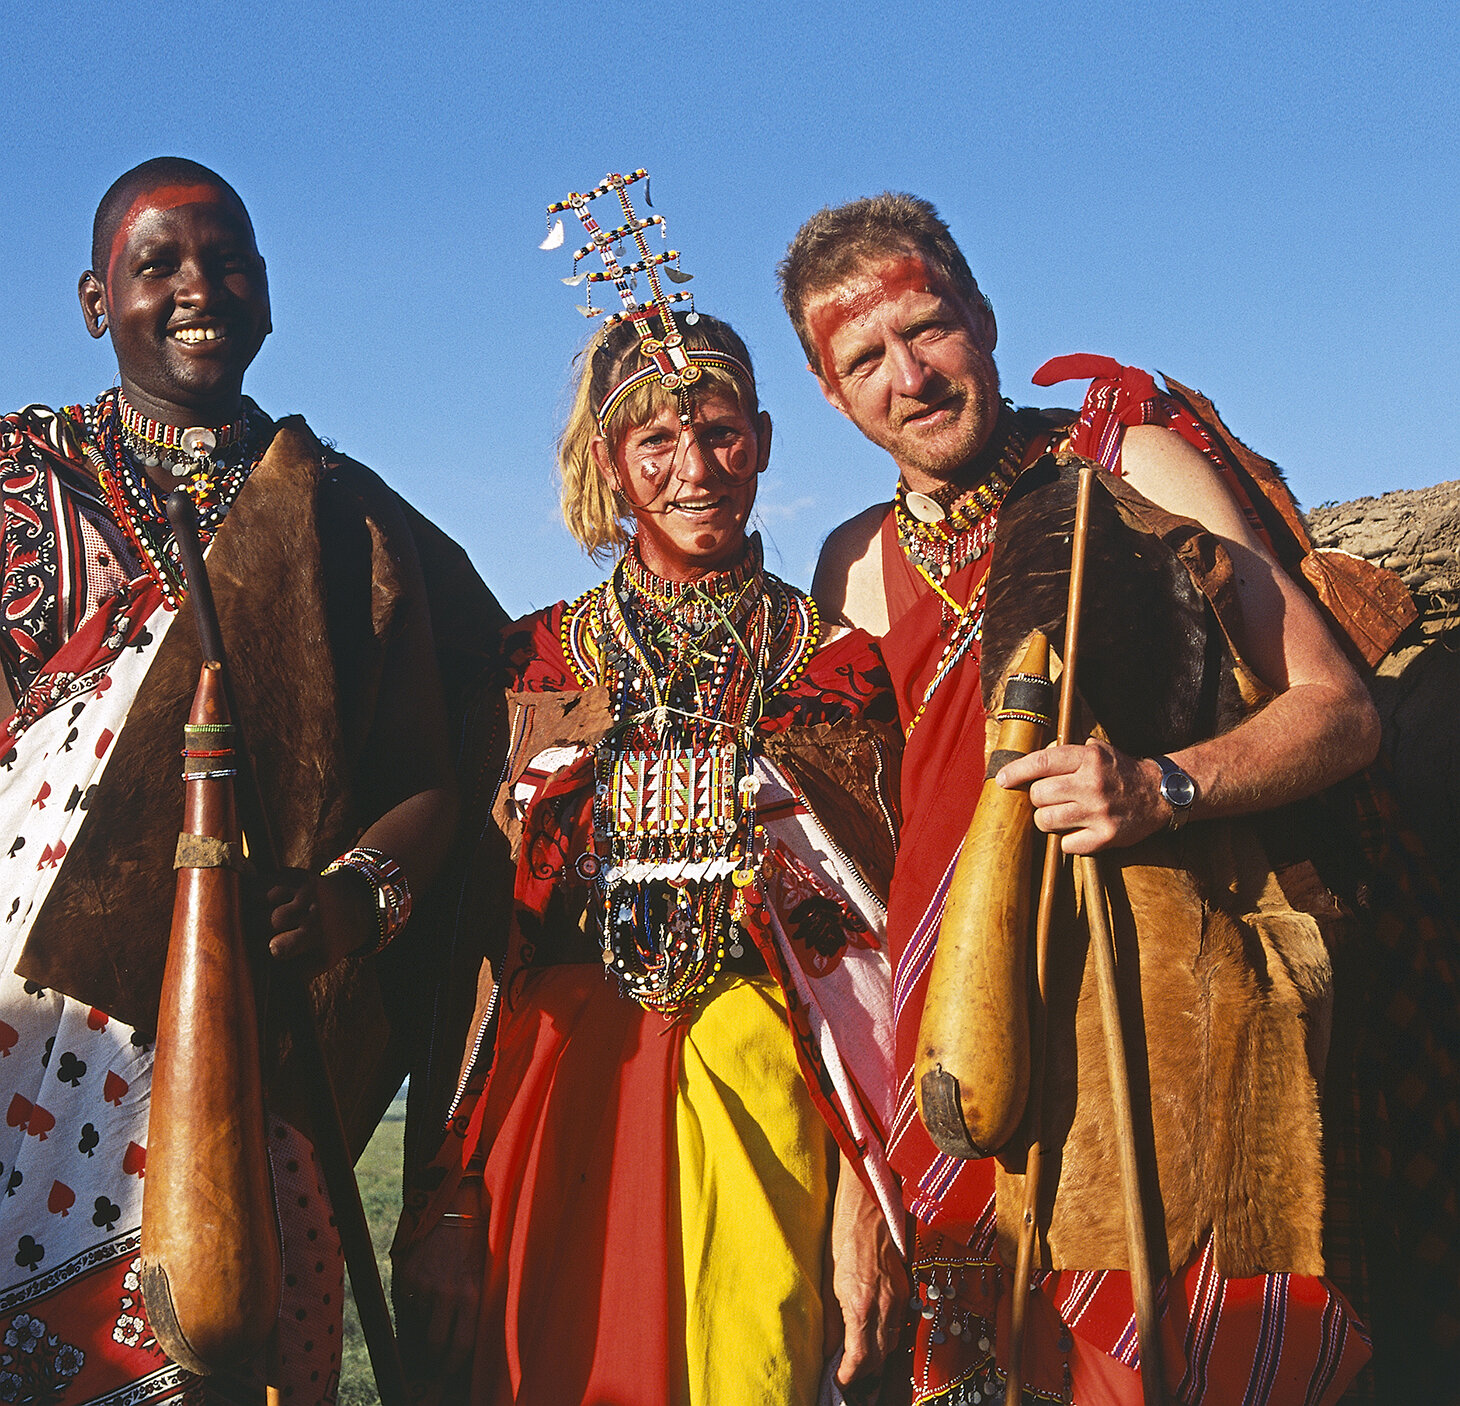 The Maasai hold a wedding ceremony for us without asking…